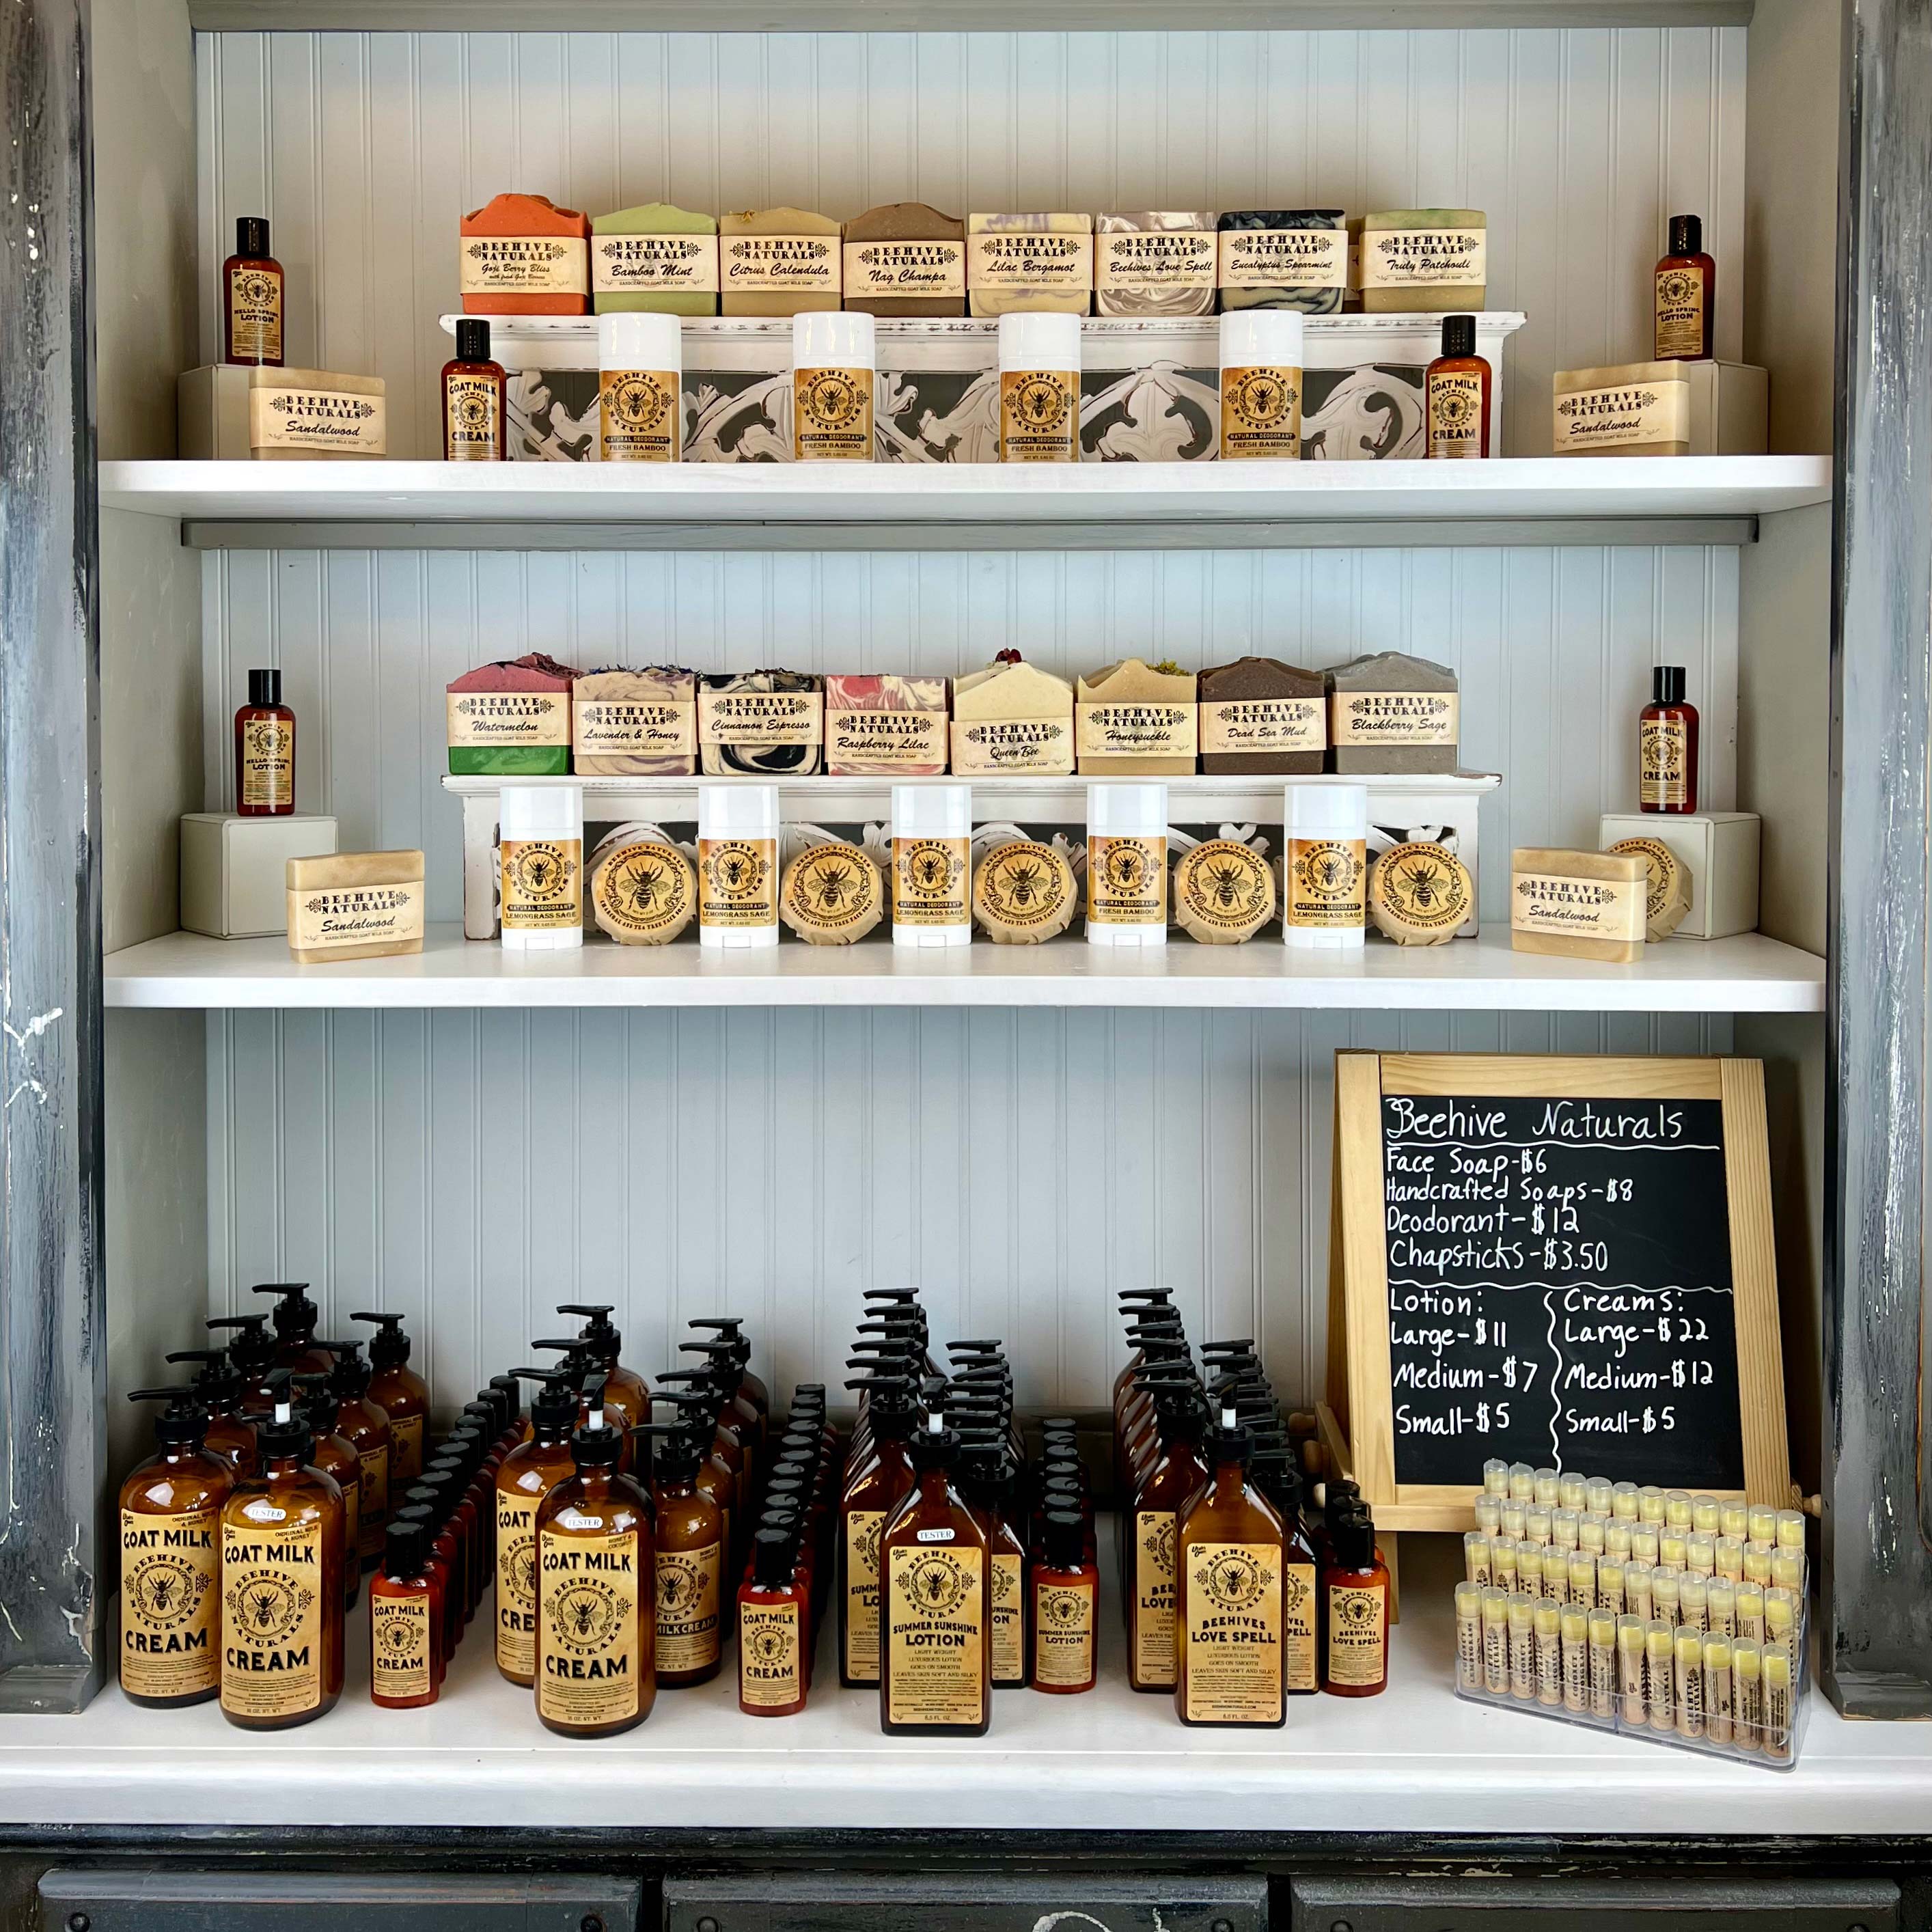 Coxs Honey Stand Beehive Naturals soap and lotions Beehive Naturals uses our beehive wax to produce one-of-a-kind handcrafted products. From soap to lotions.